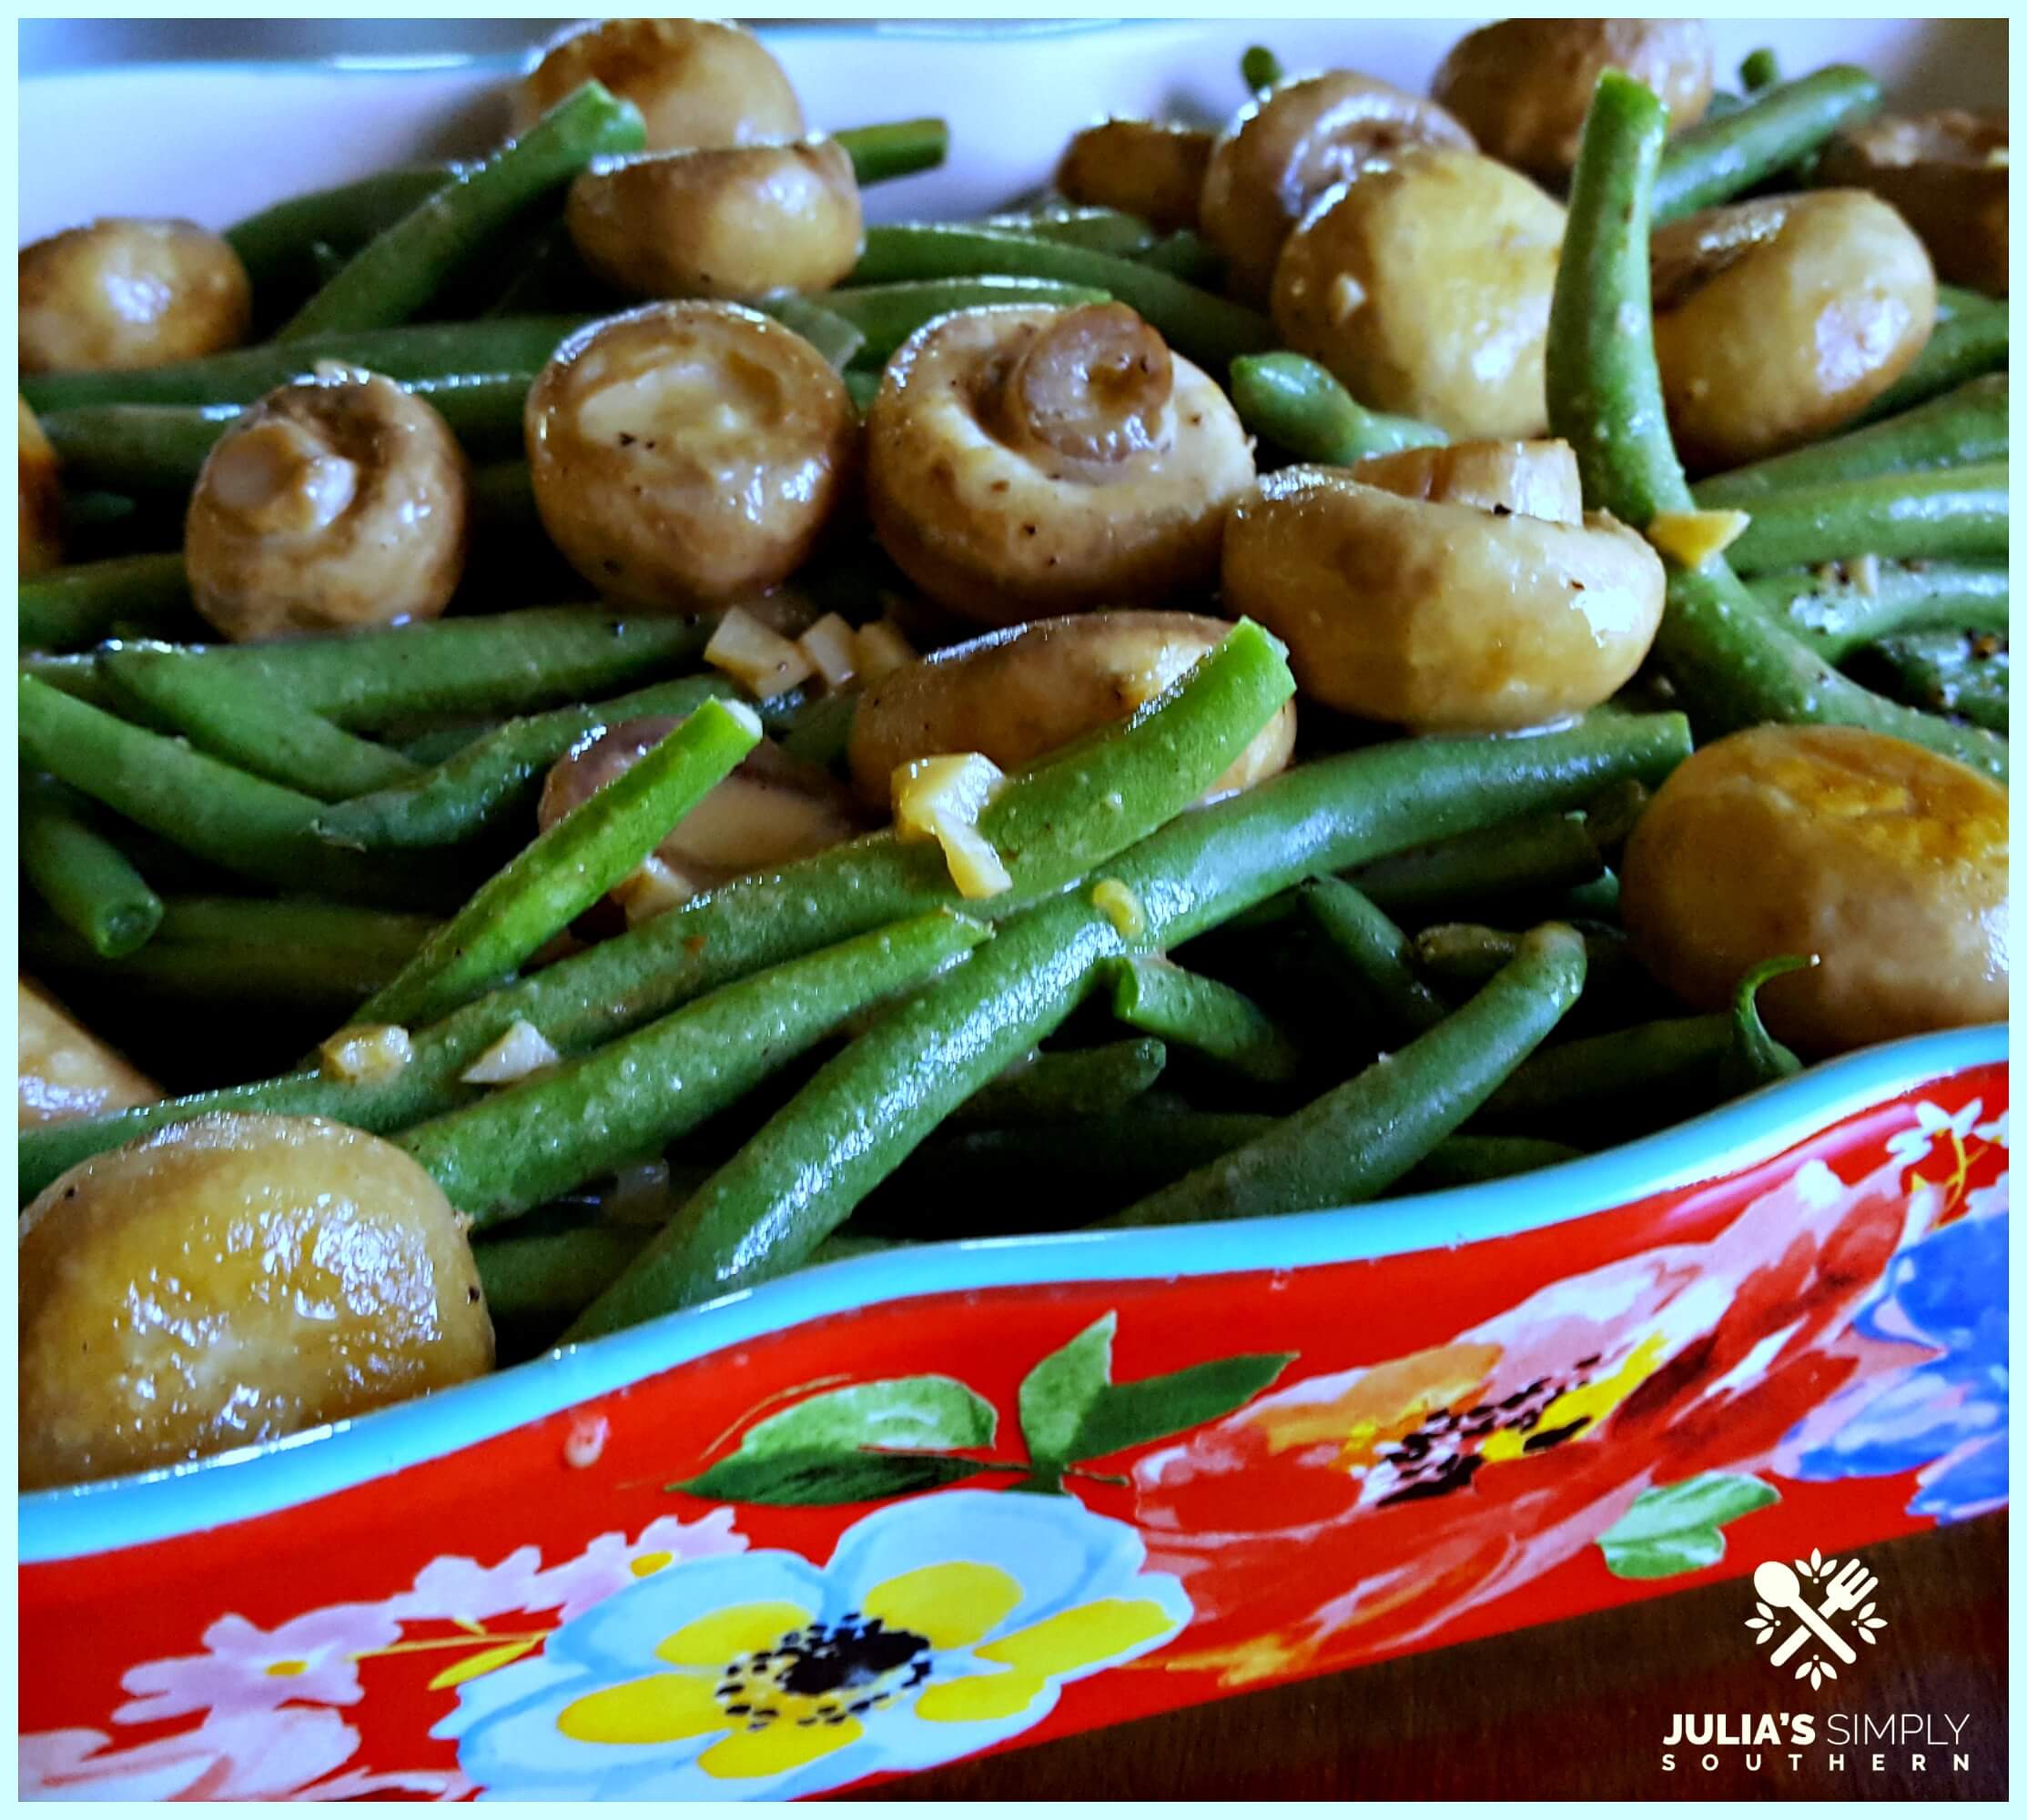 Fresh Green Beans and Fresh Mushrooms with garlic side dish in a red floral casserole dish